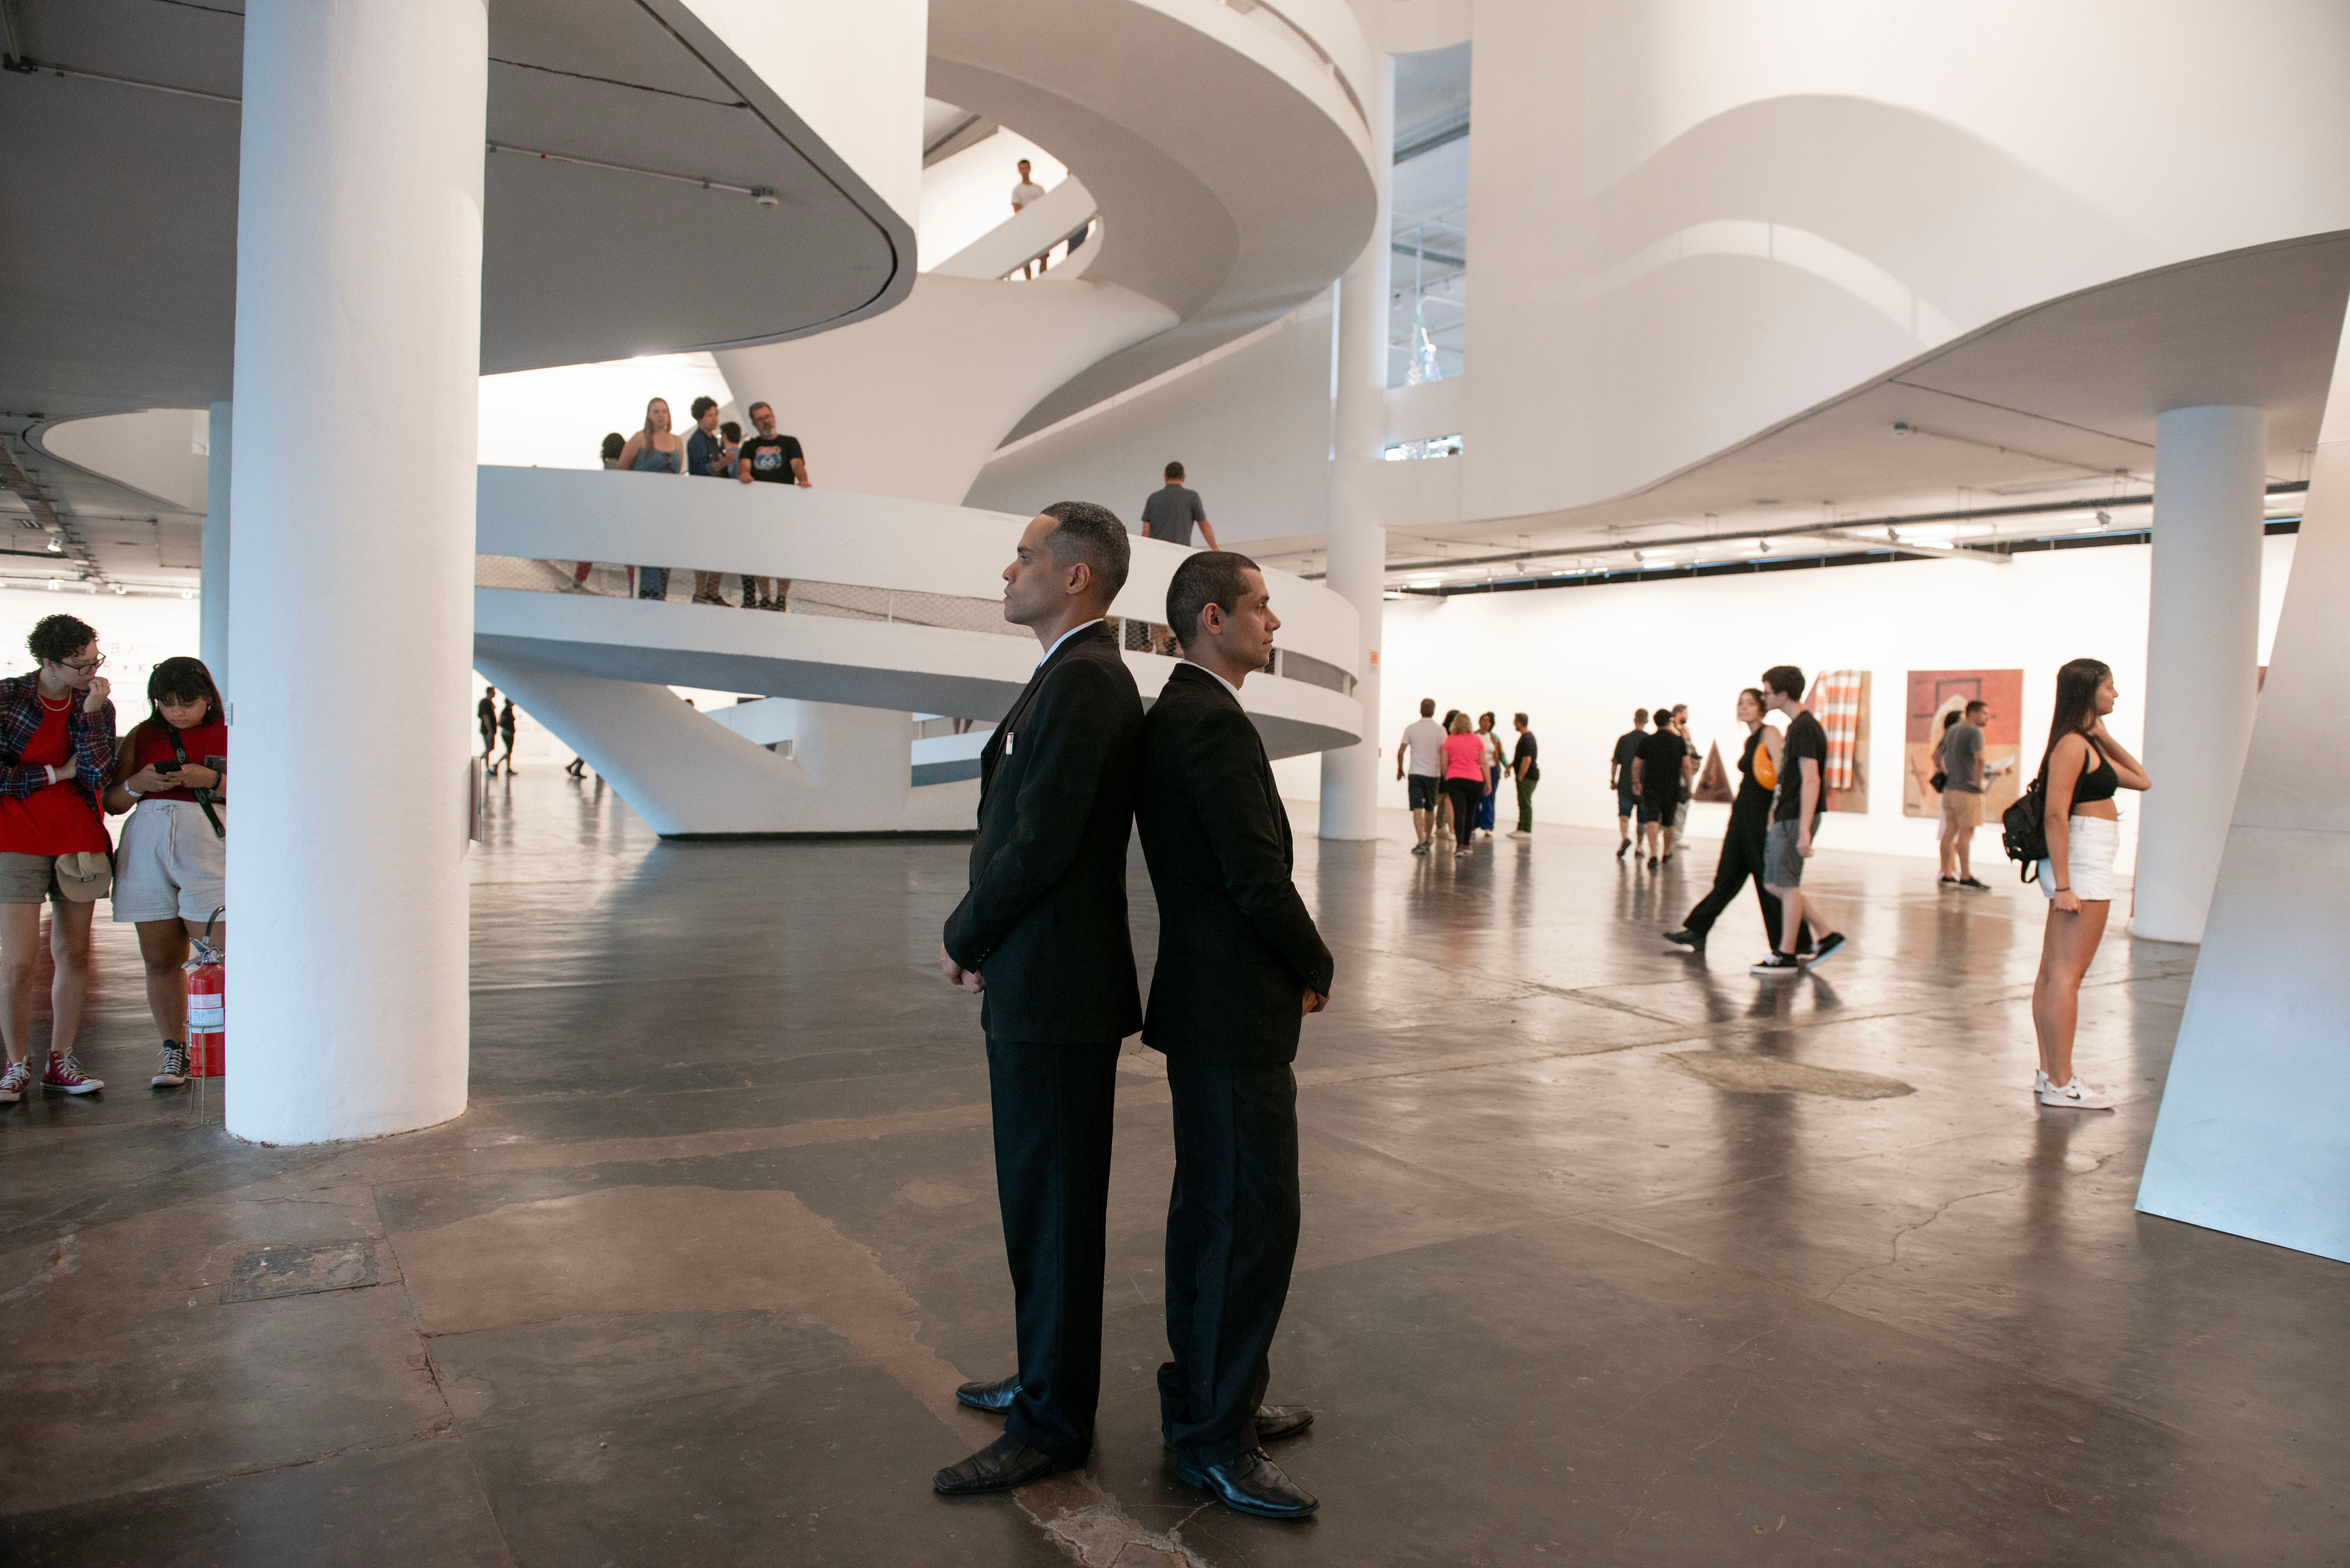 Two security guards stand back to back in a winding, white exhibition space packed with visitors.